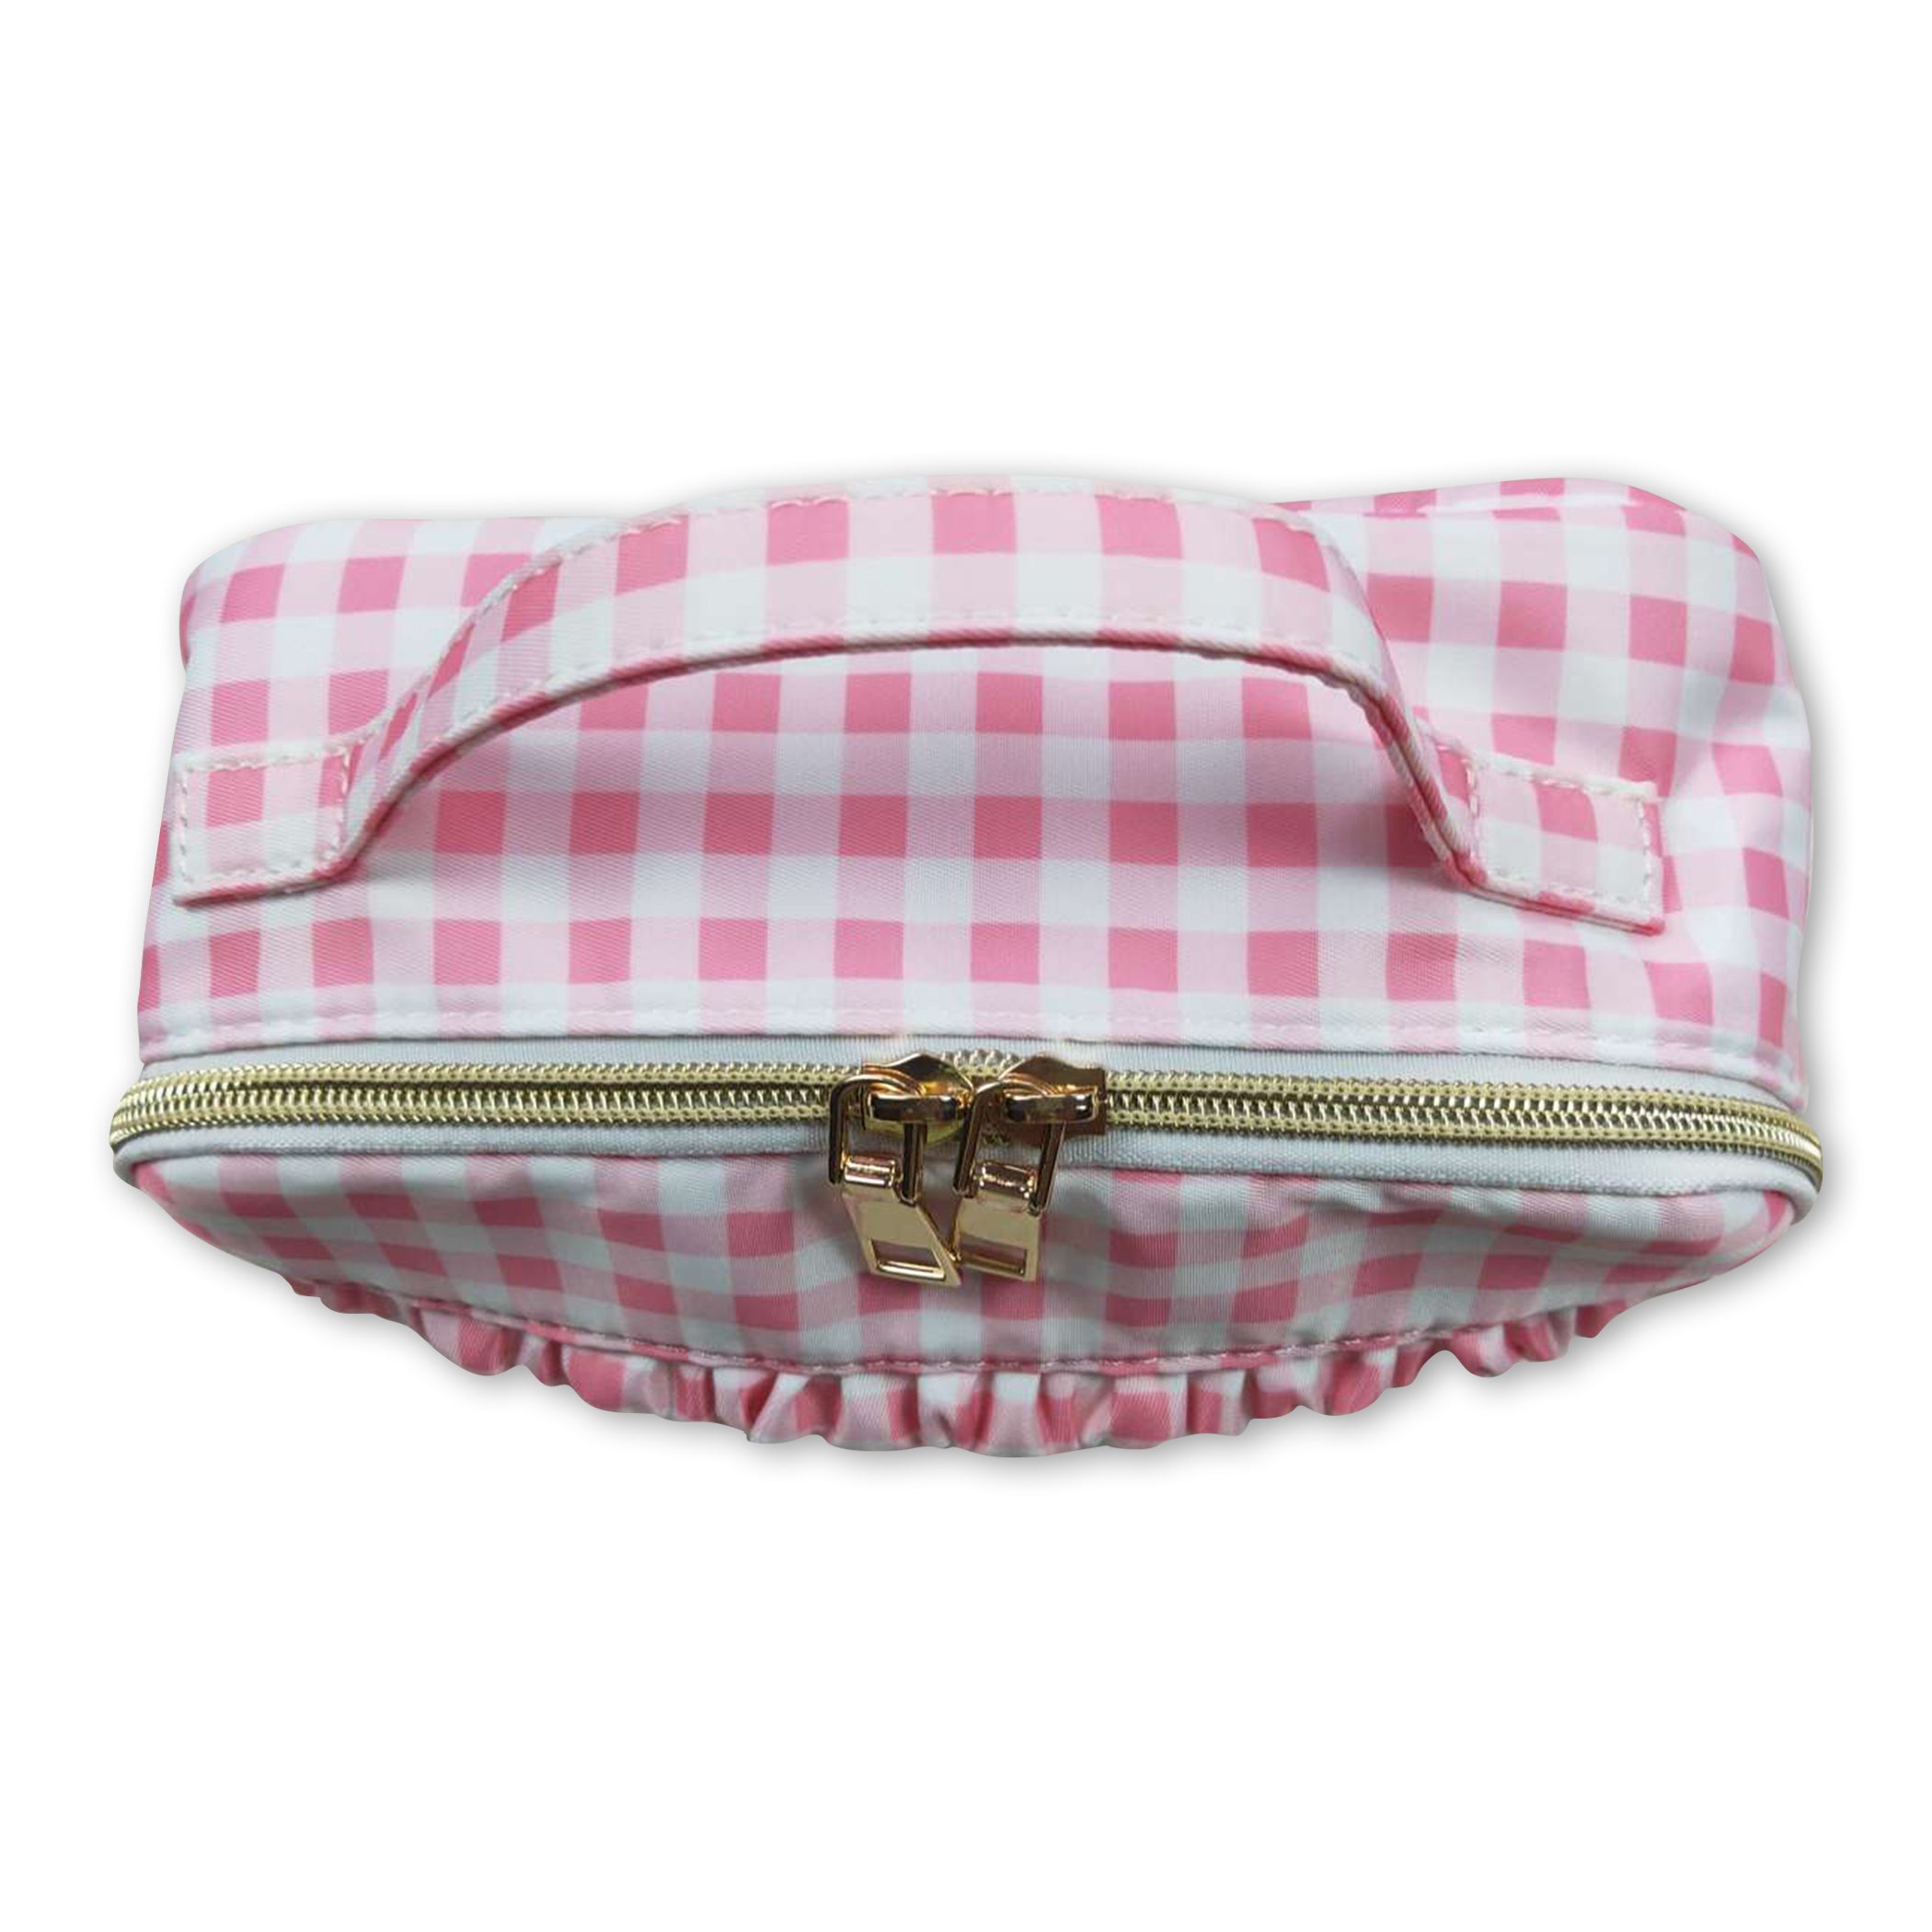 Neon-pink Plaid Embossed Square Bag With Coin Purse | SHEIN